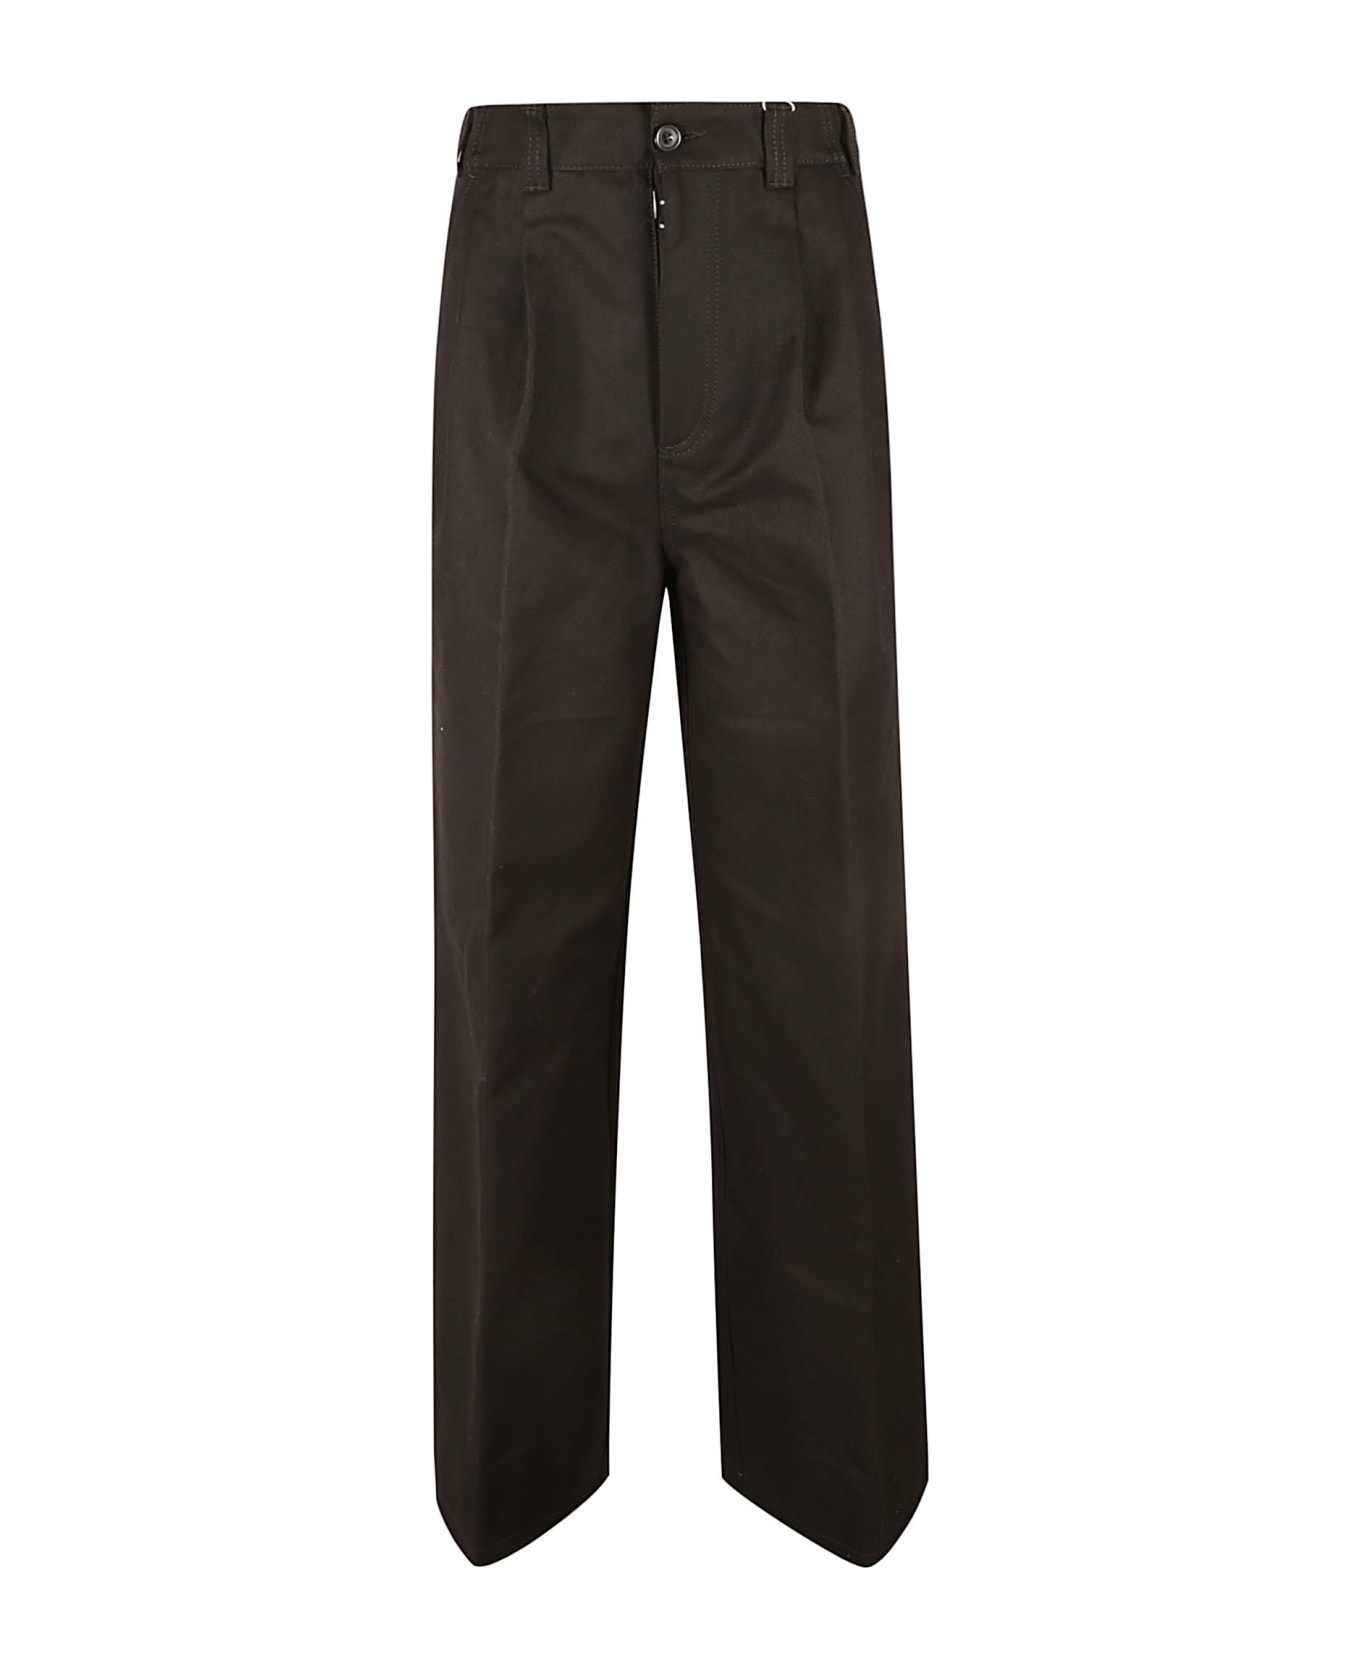 Maison Margiela Straight Buttoned Trousers - Black ボトムス